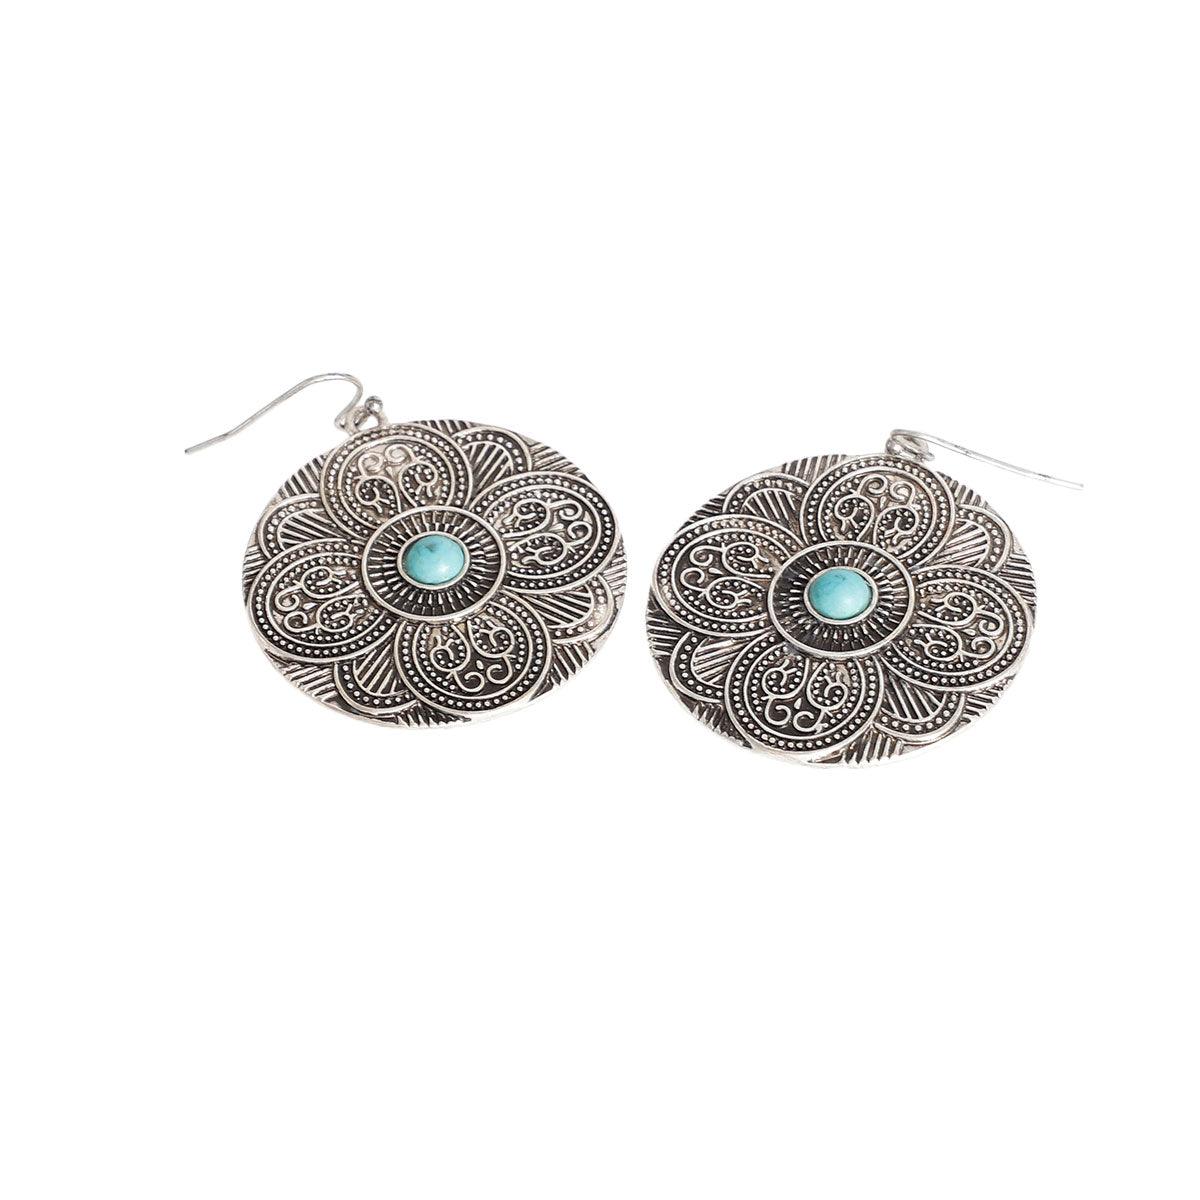 Shop Burnished Silver Engraved Earrings - Get Yours Today